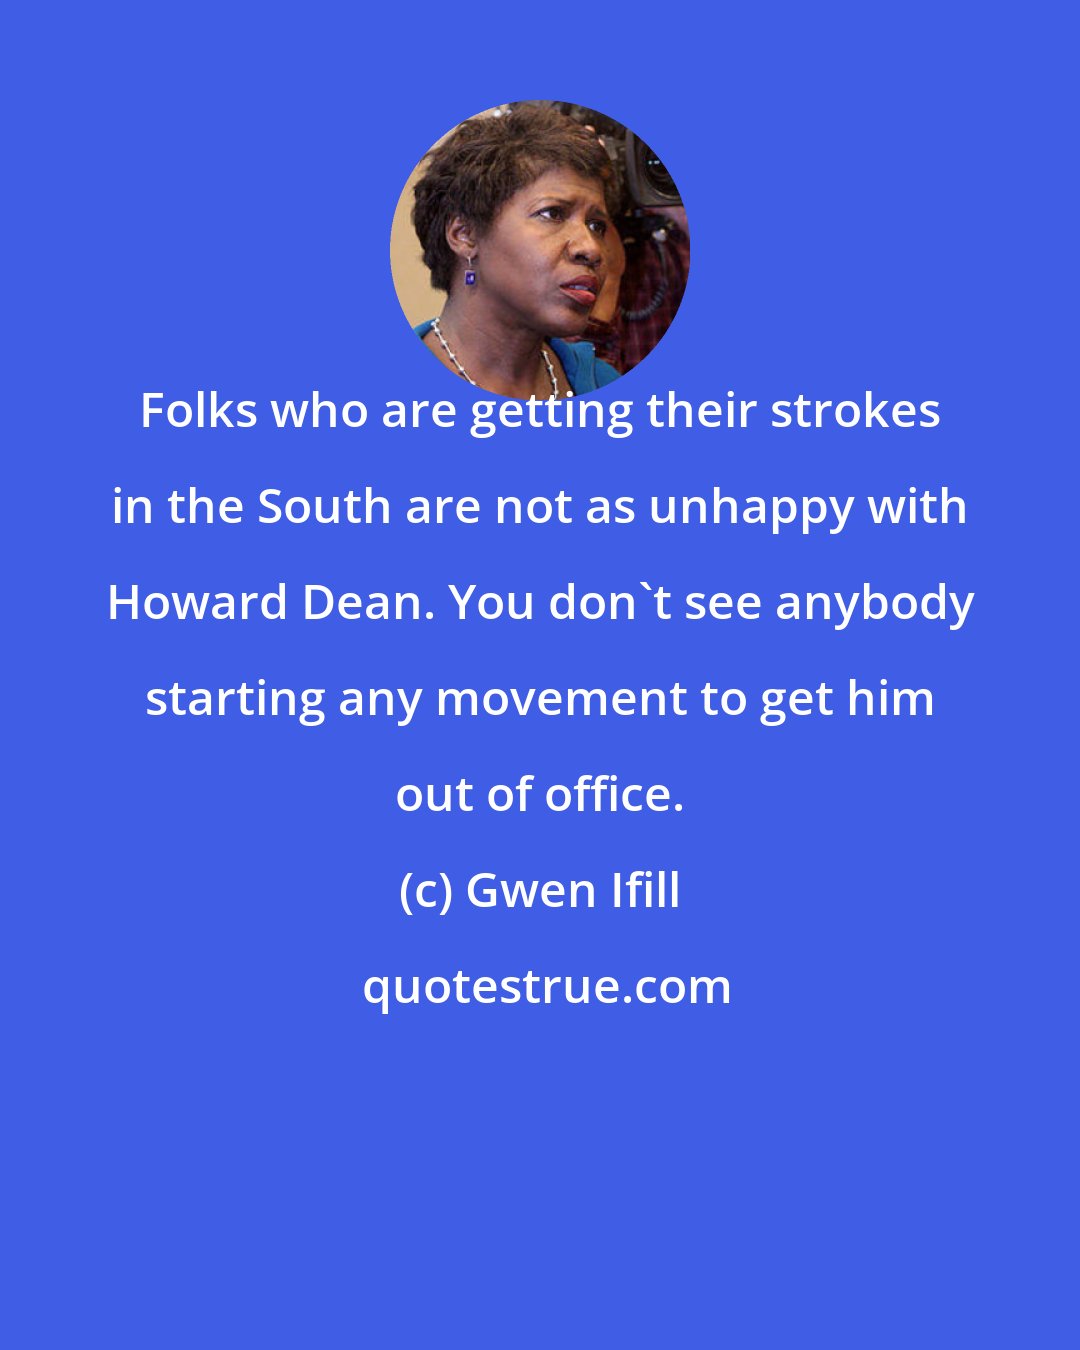 Gwen Ifill: Folks who are getting their strokes in the South are not as unhappy with Howard Dean. You don't see anybody starting any movement to get him out of office.